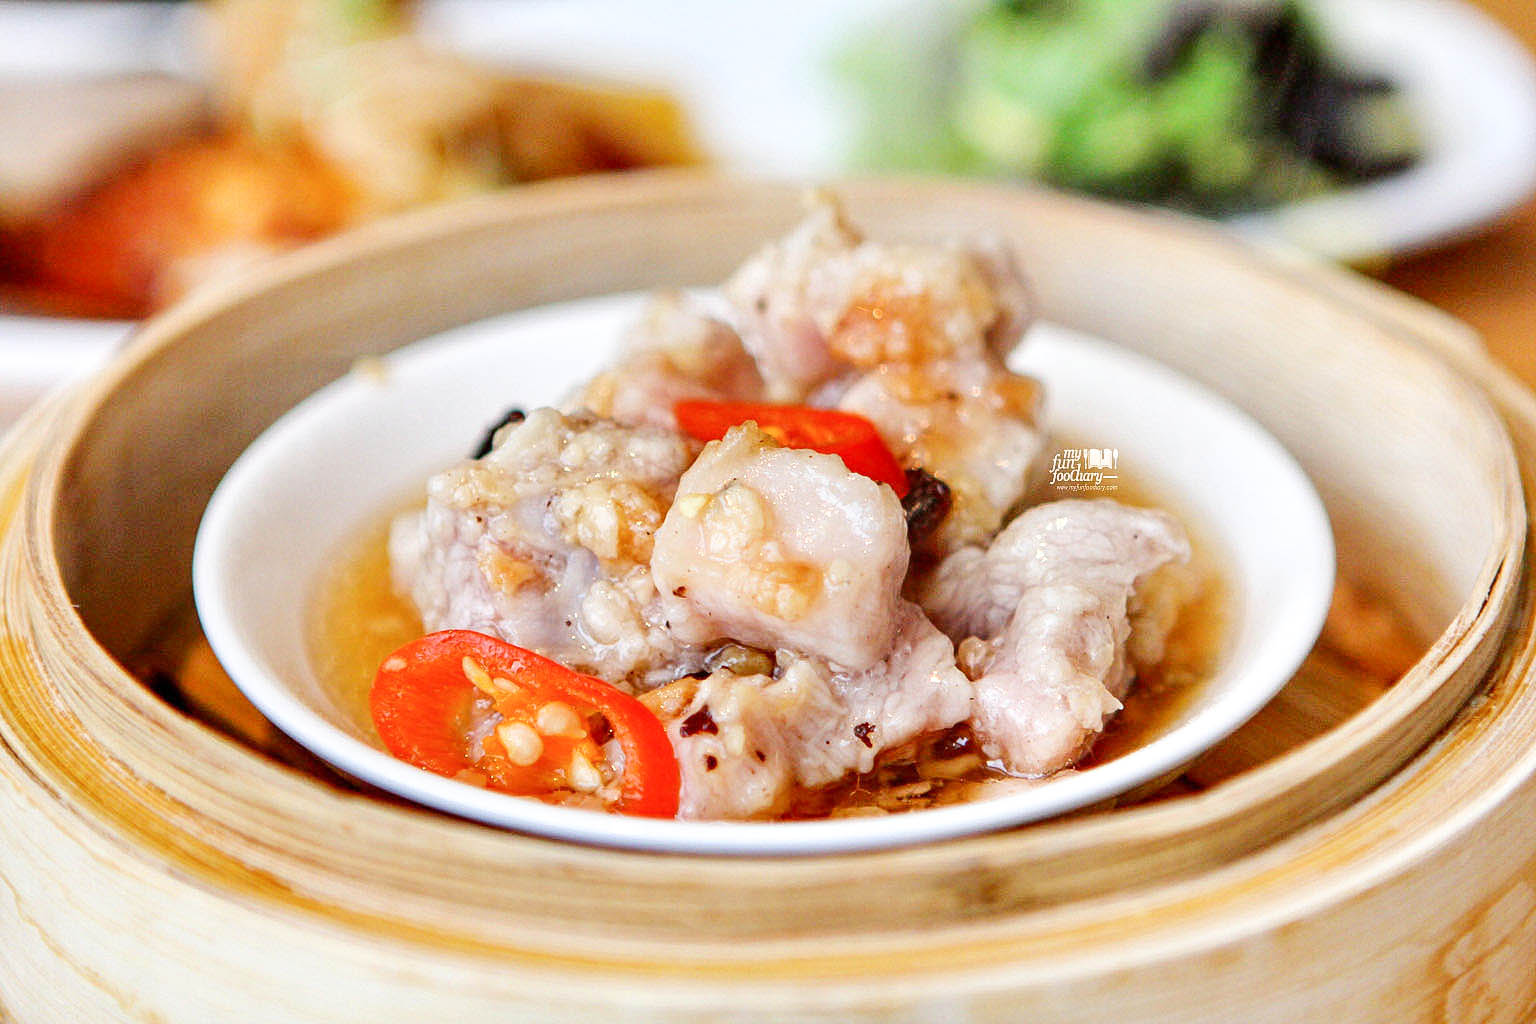 Steamed Pork Ribs at MAD Jakarta by Myfunfoodiary 02